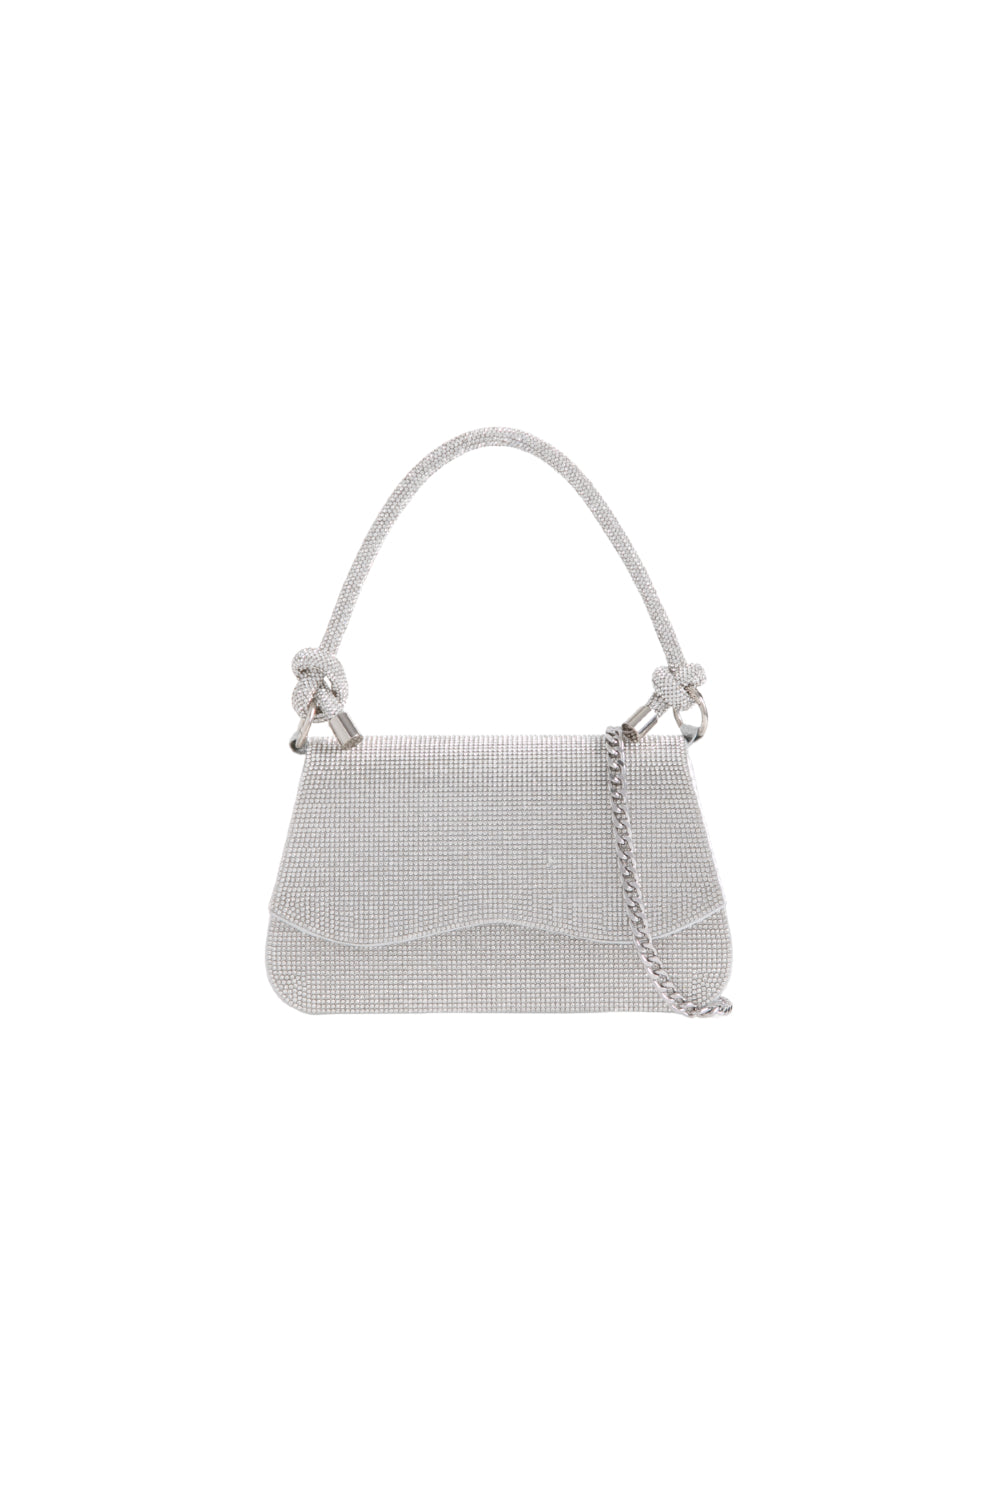 Silver Diamante Top Handle Bag With Knot Details